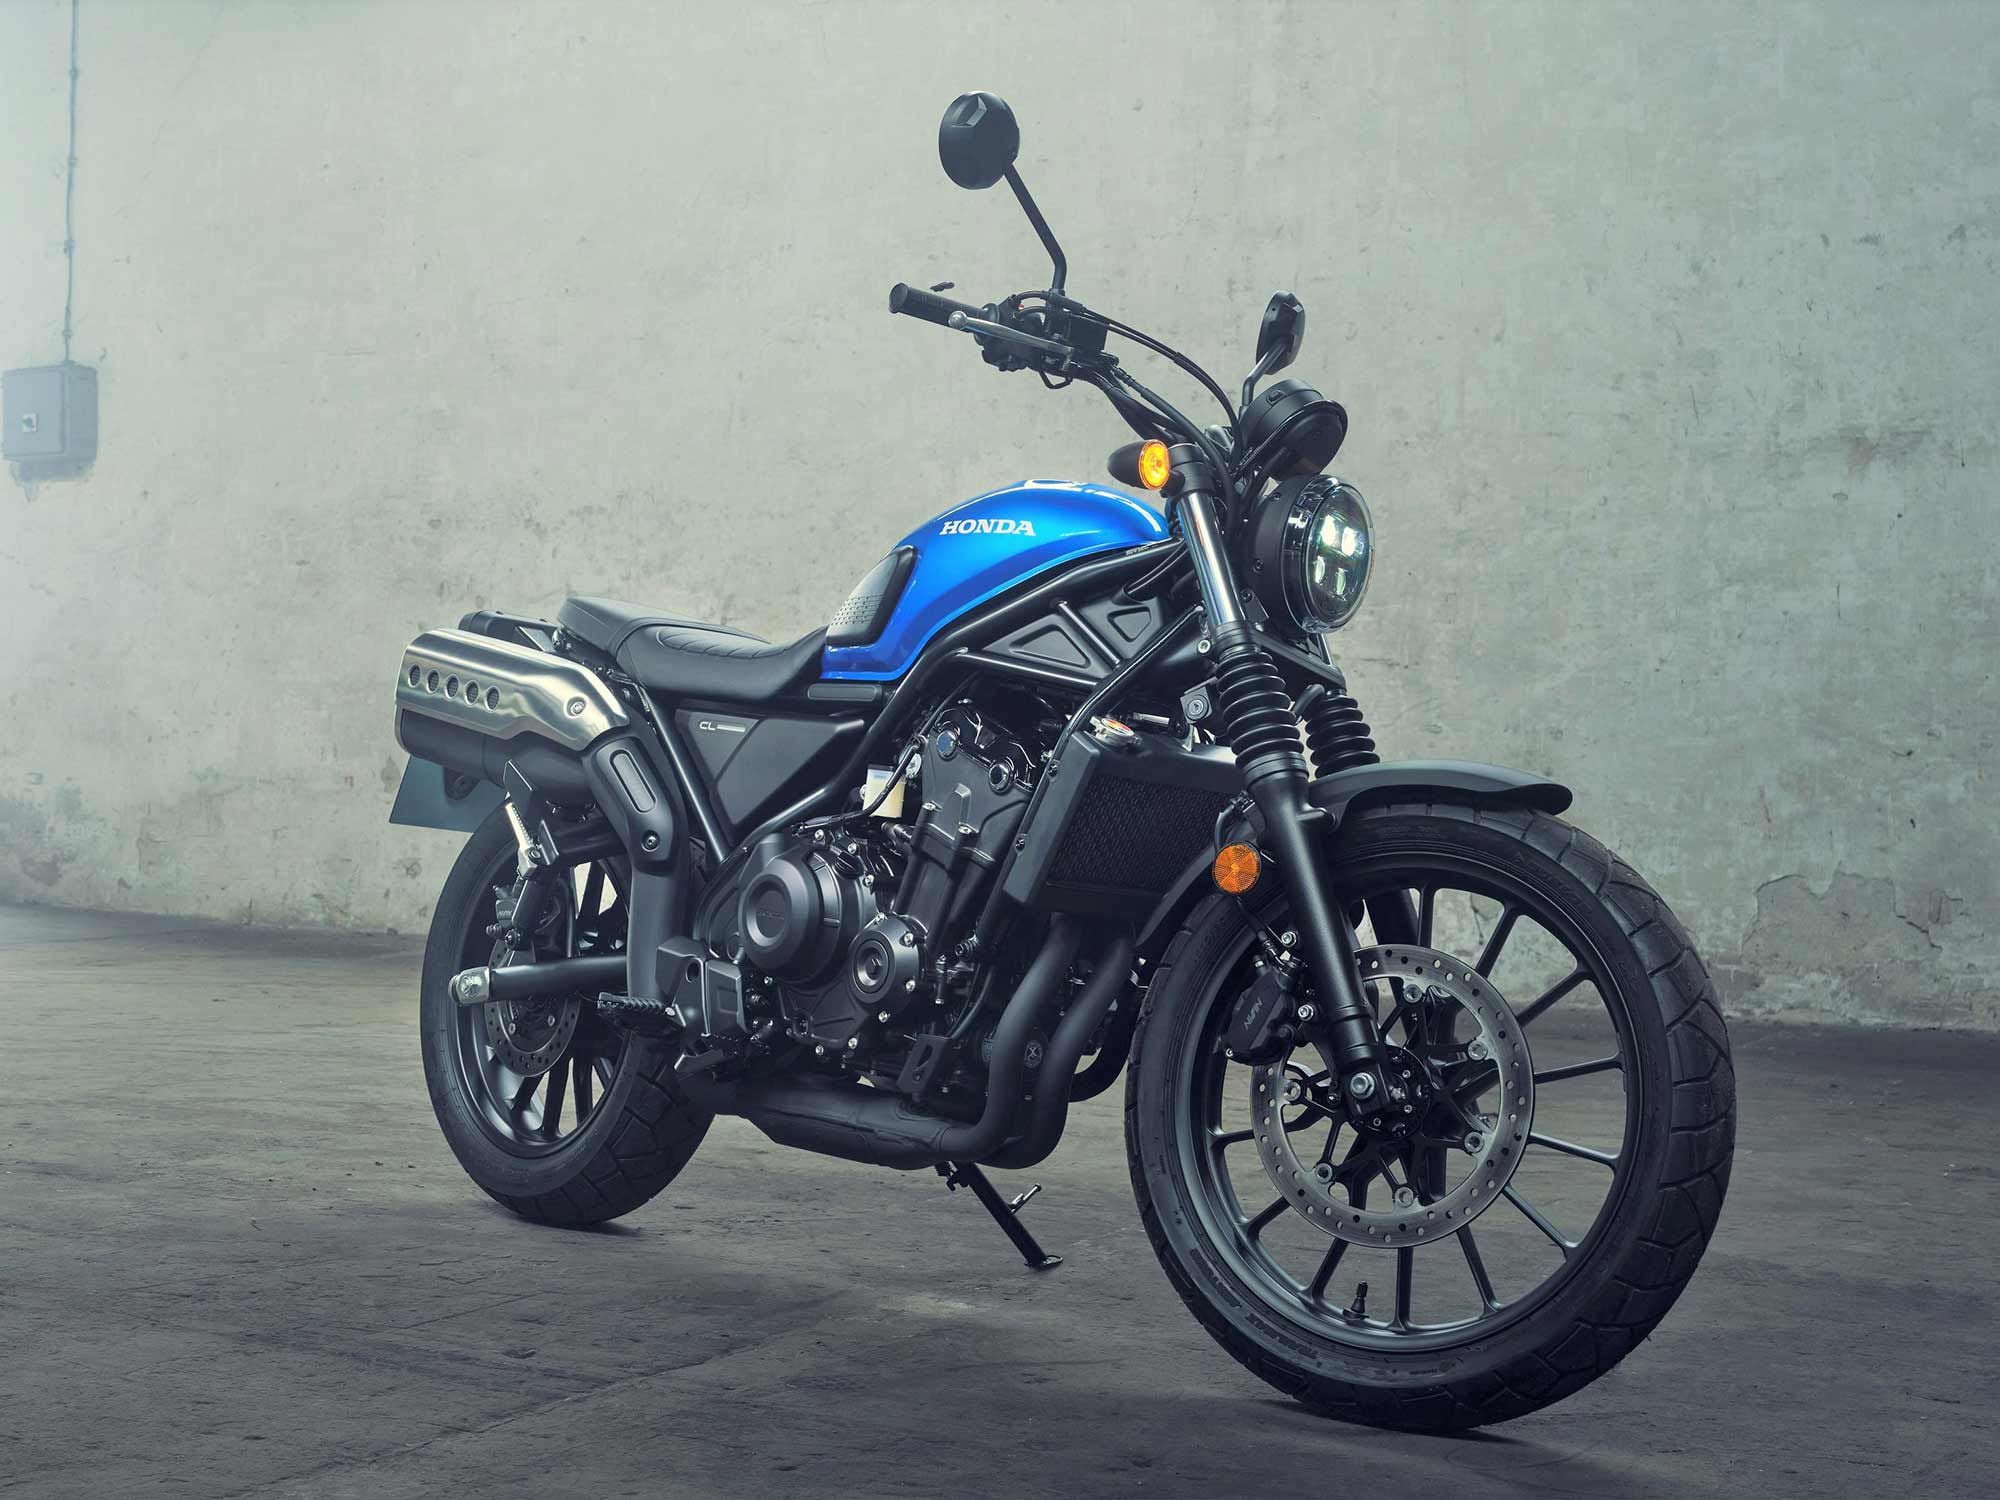 The CL nameplate is a nod to Honda’s 1960s-era scrambler models that came to the US, though the CL500 is confirmed only for the European market so far.